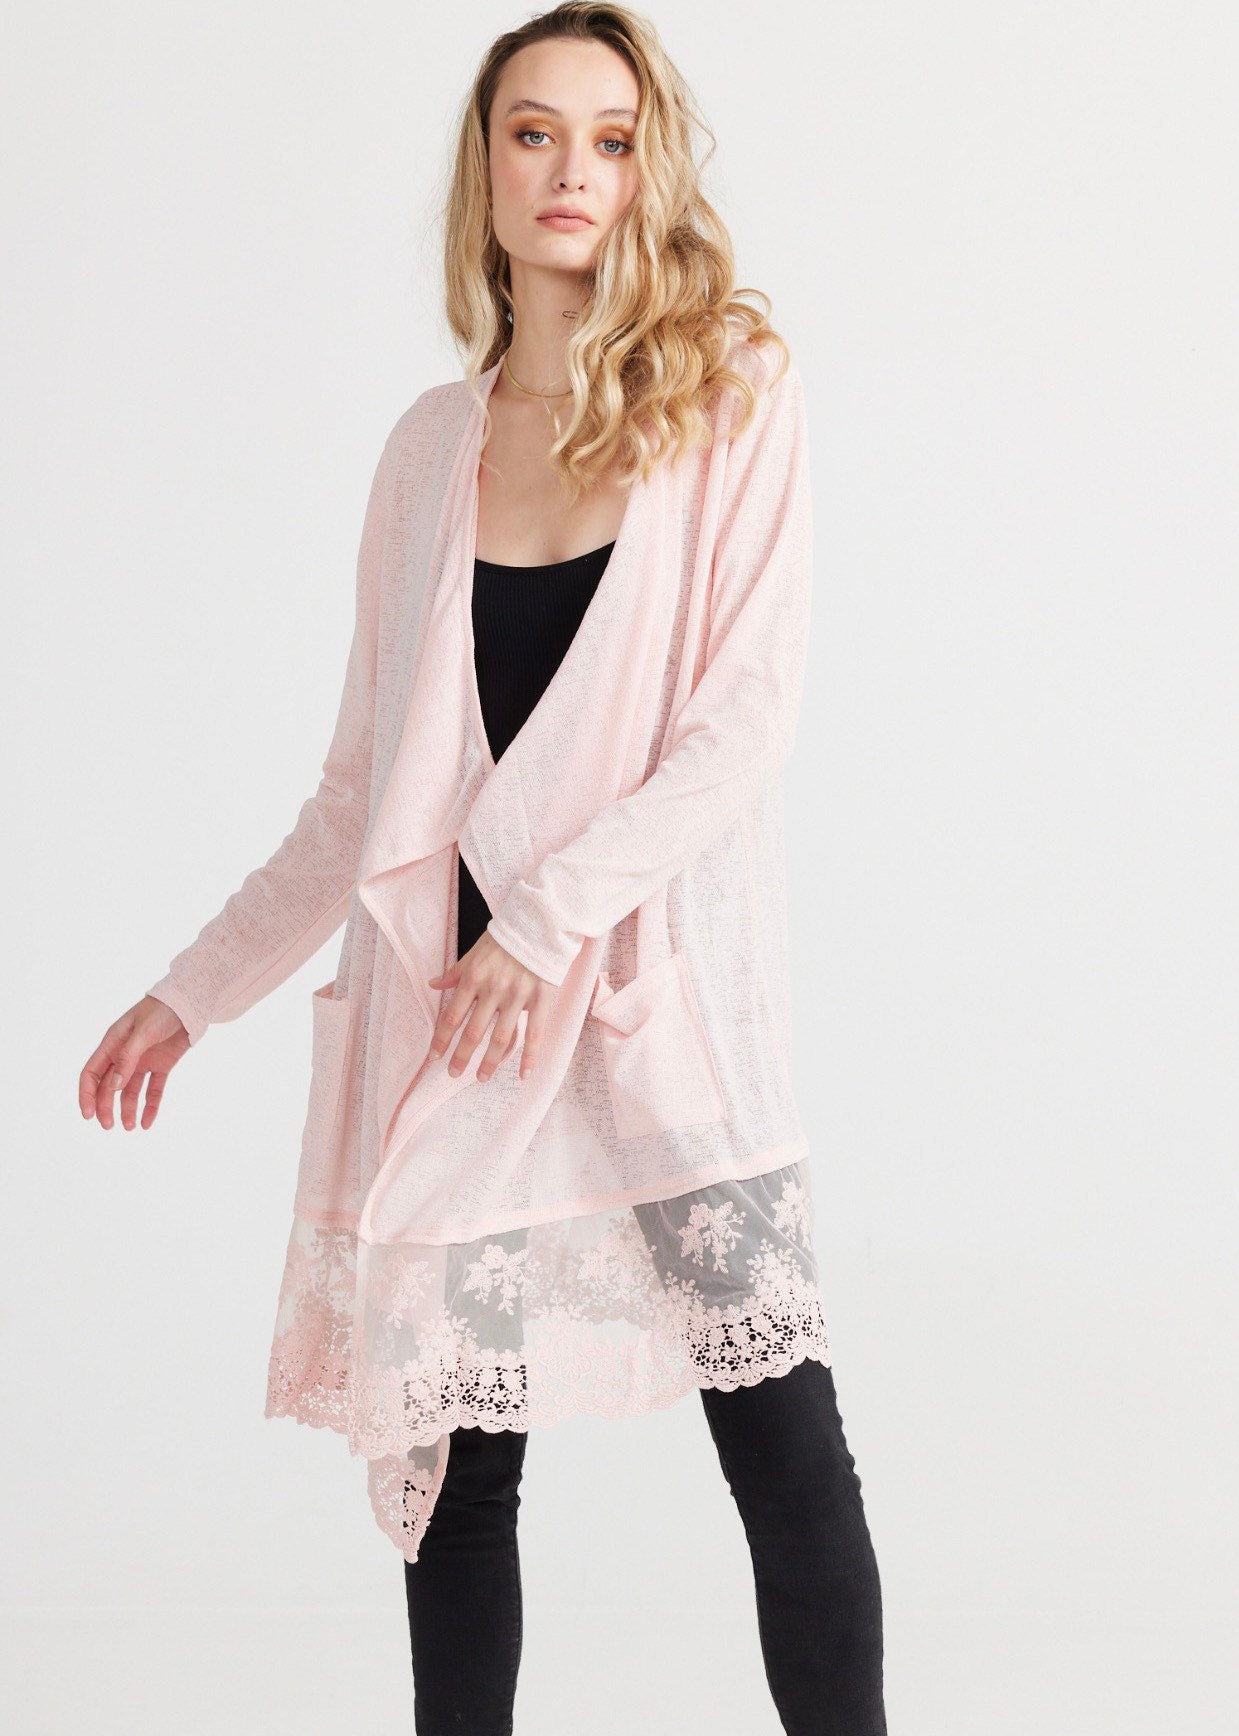 The Poet Long Cardigan With Lace Edging. Light Cover up for - Etsy